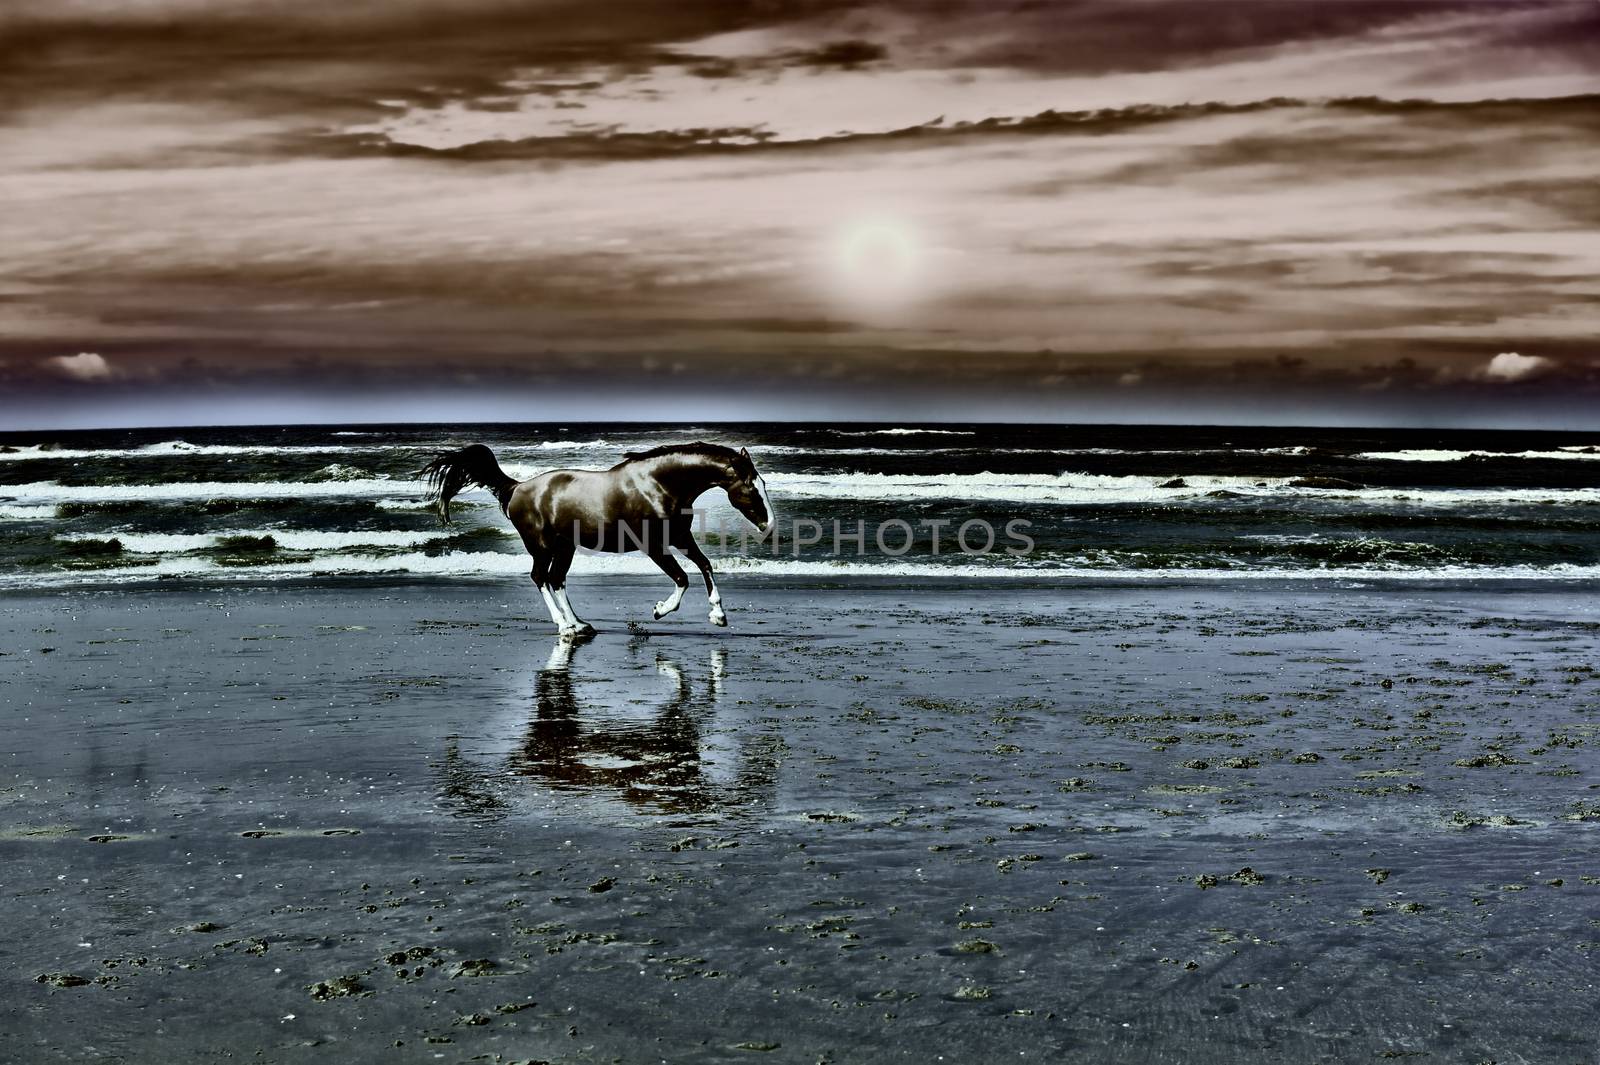 Dancing Horse on the North Sea Coast in Netherlands at Sunset, Vintage Style Toned Picture